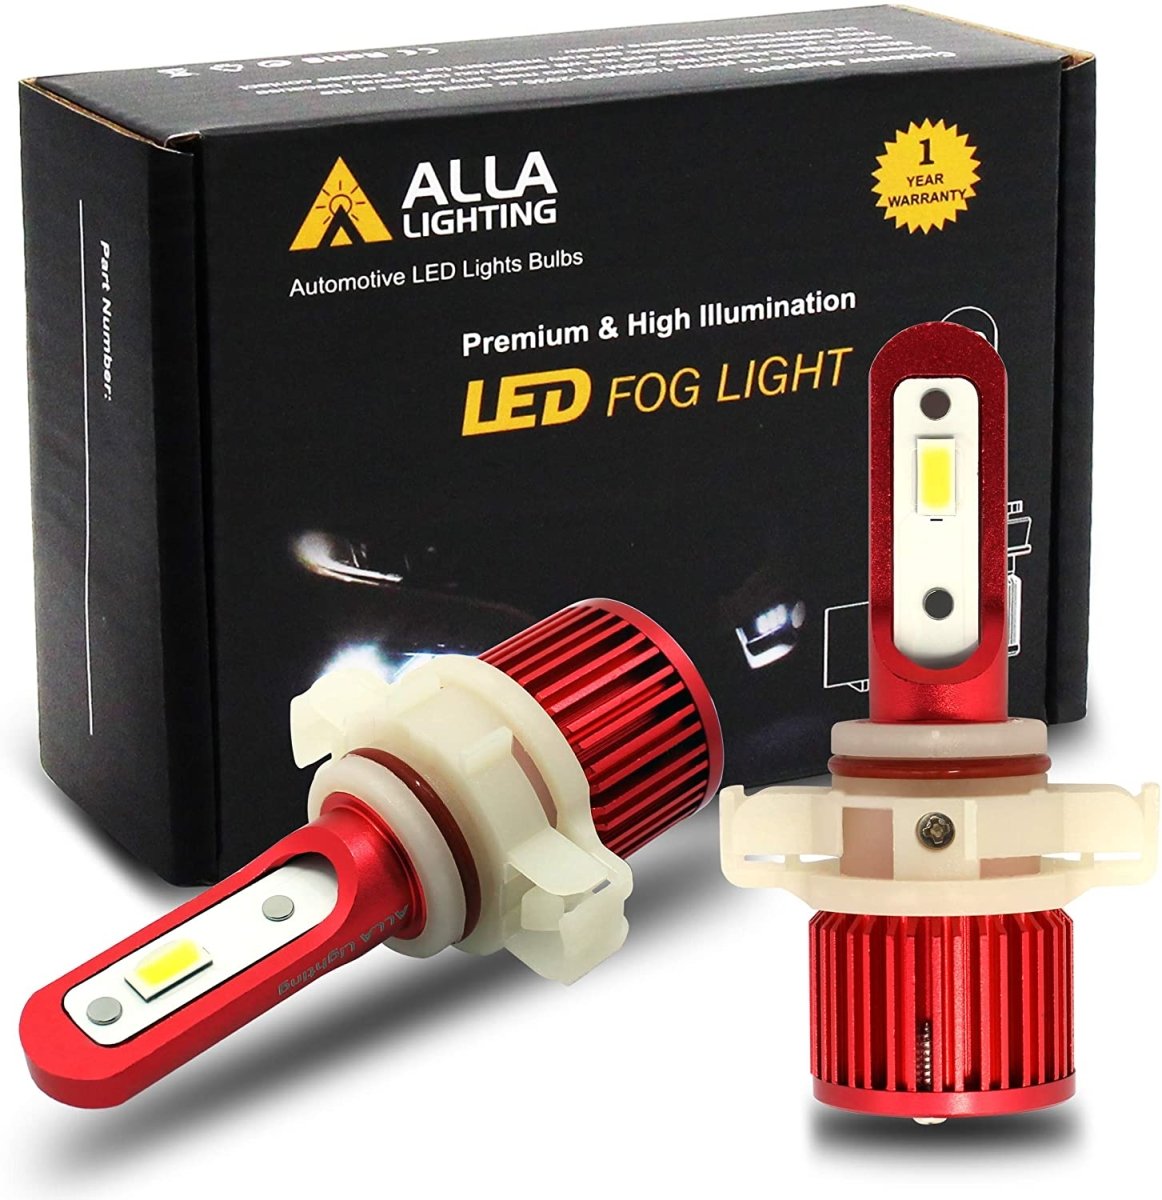 Ford Mustang Shelby GT500 Fog Lights Bulbs Replacement GT500KR LED Upgrade -Alla Lighting